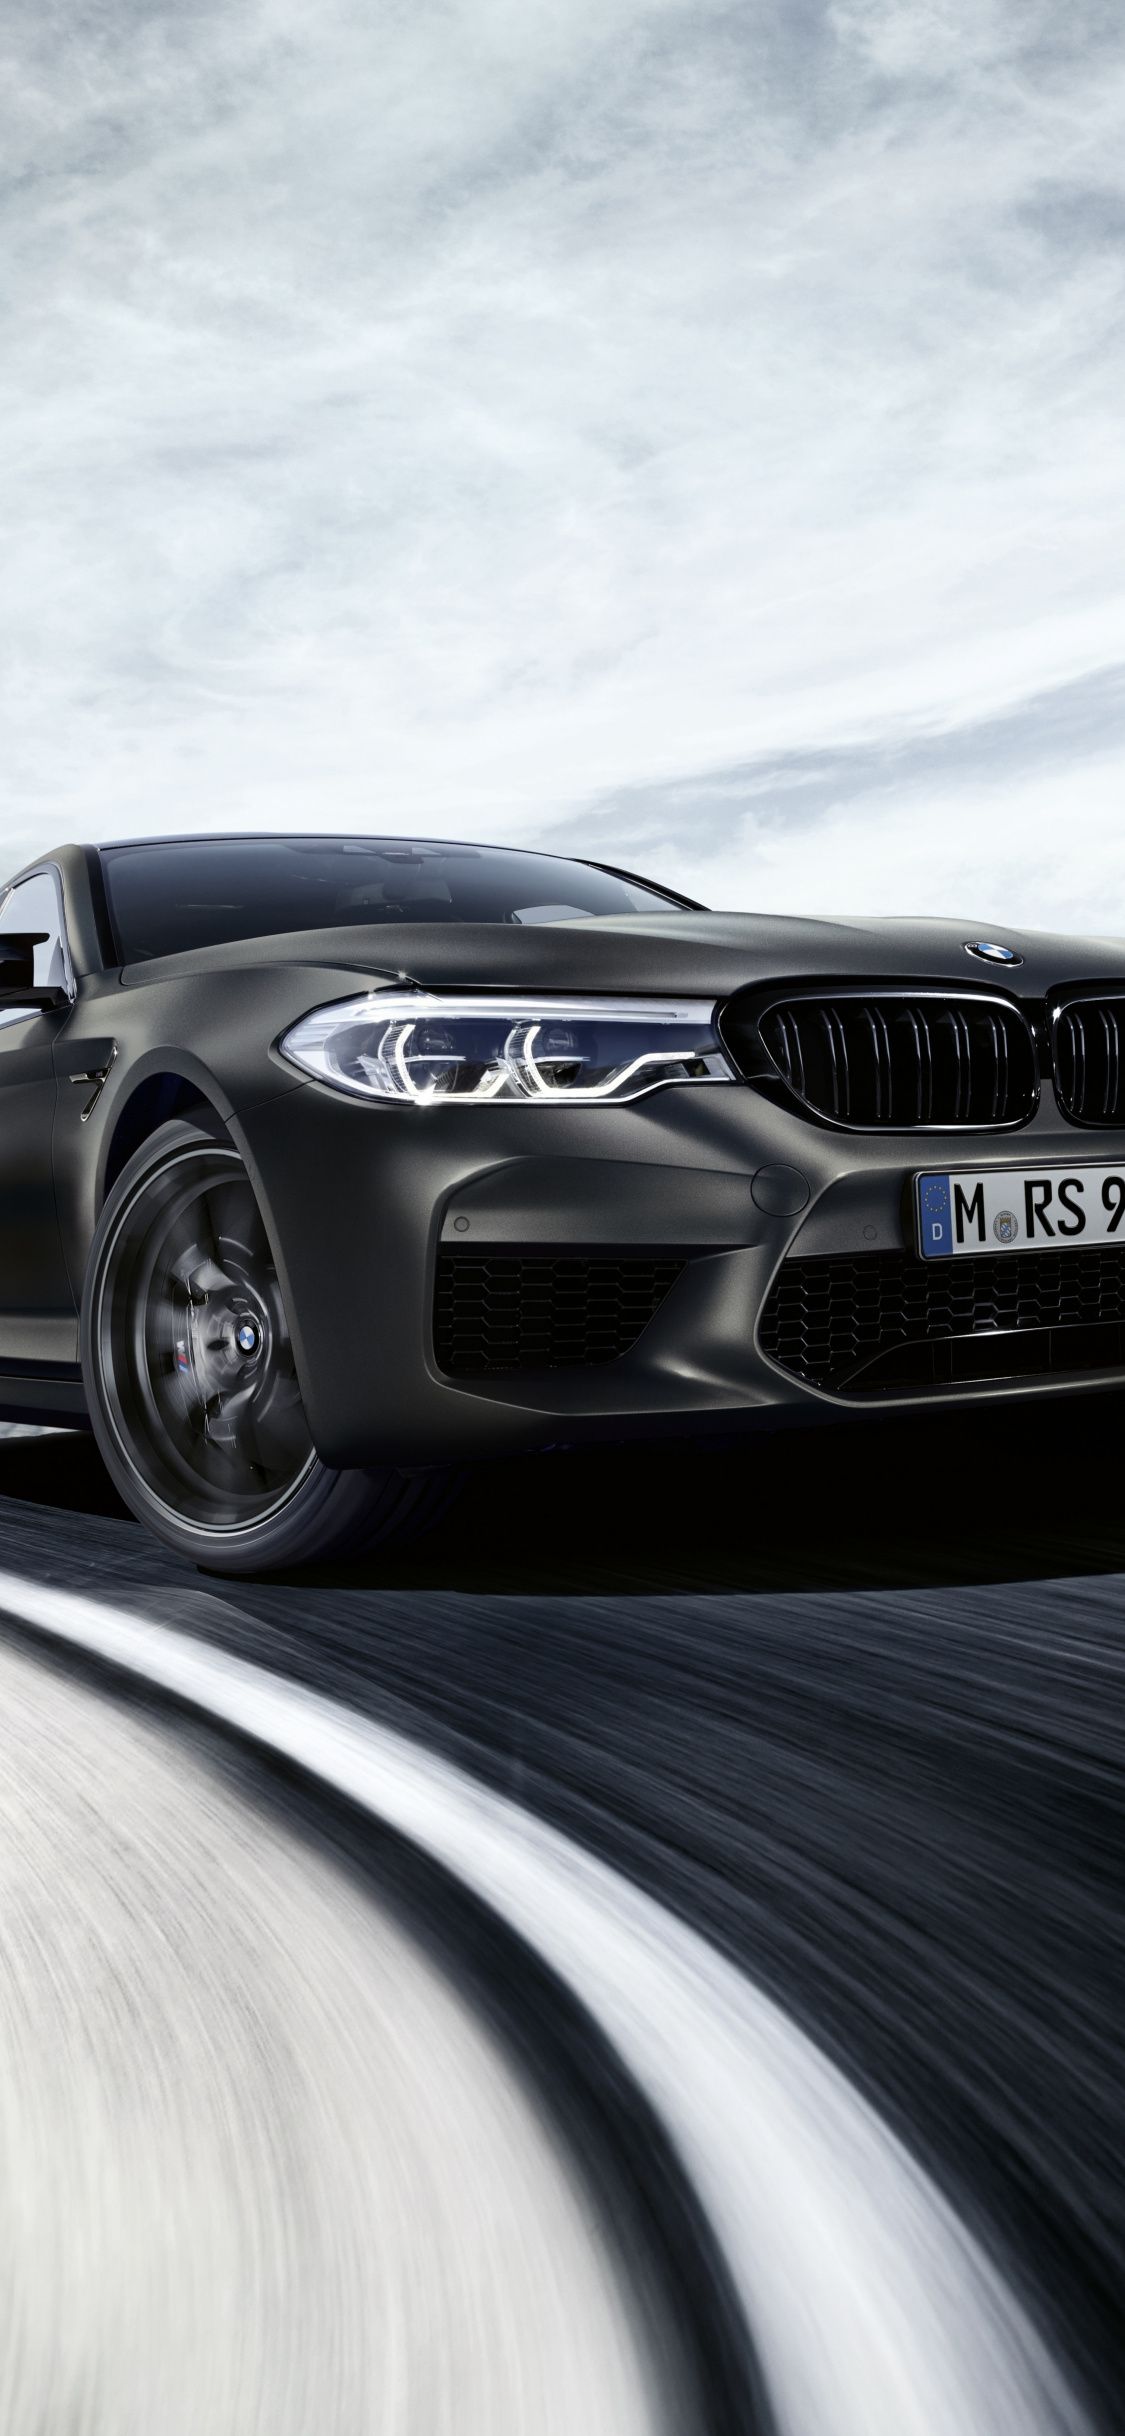 10+ BMW M5 CS HD Wallpapers and Backgrounds